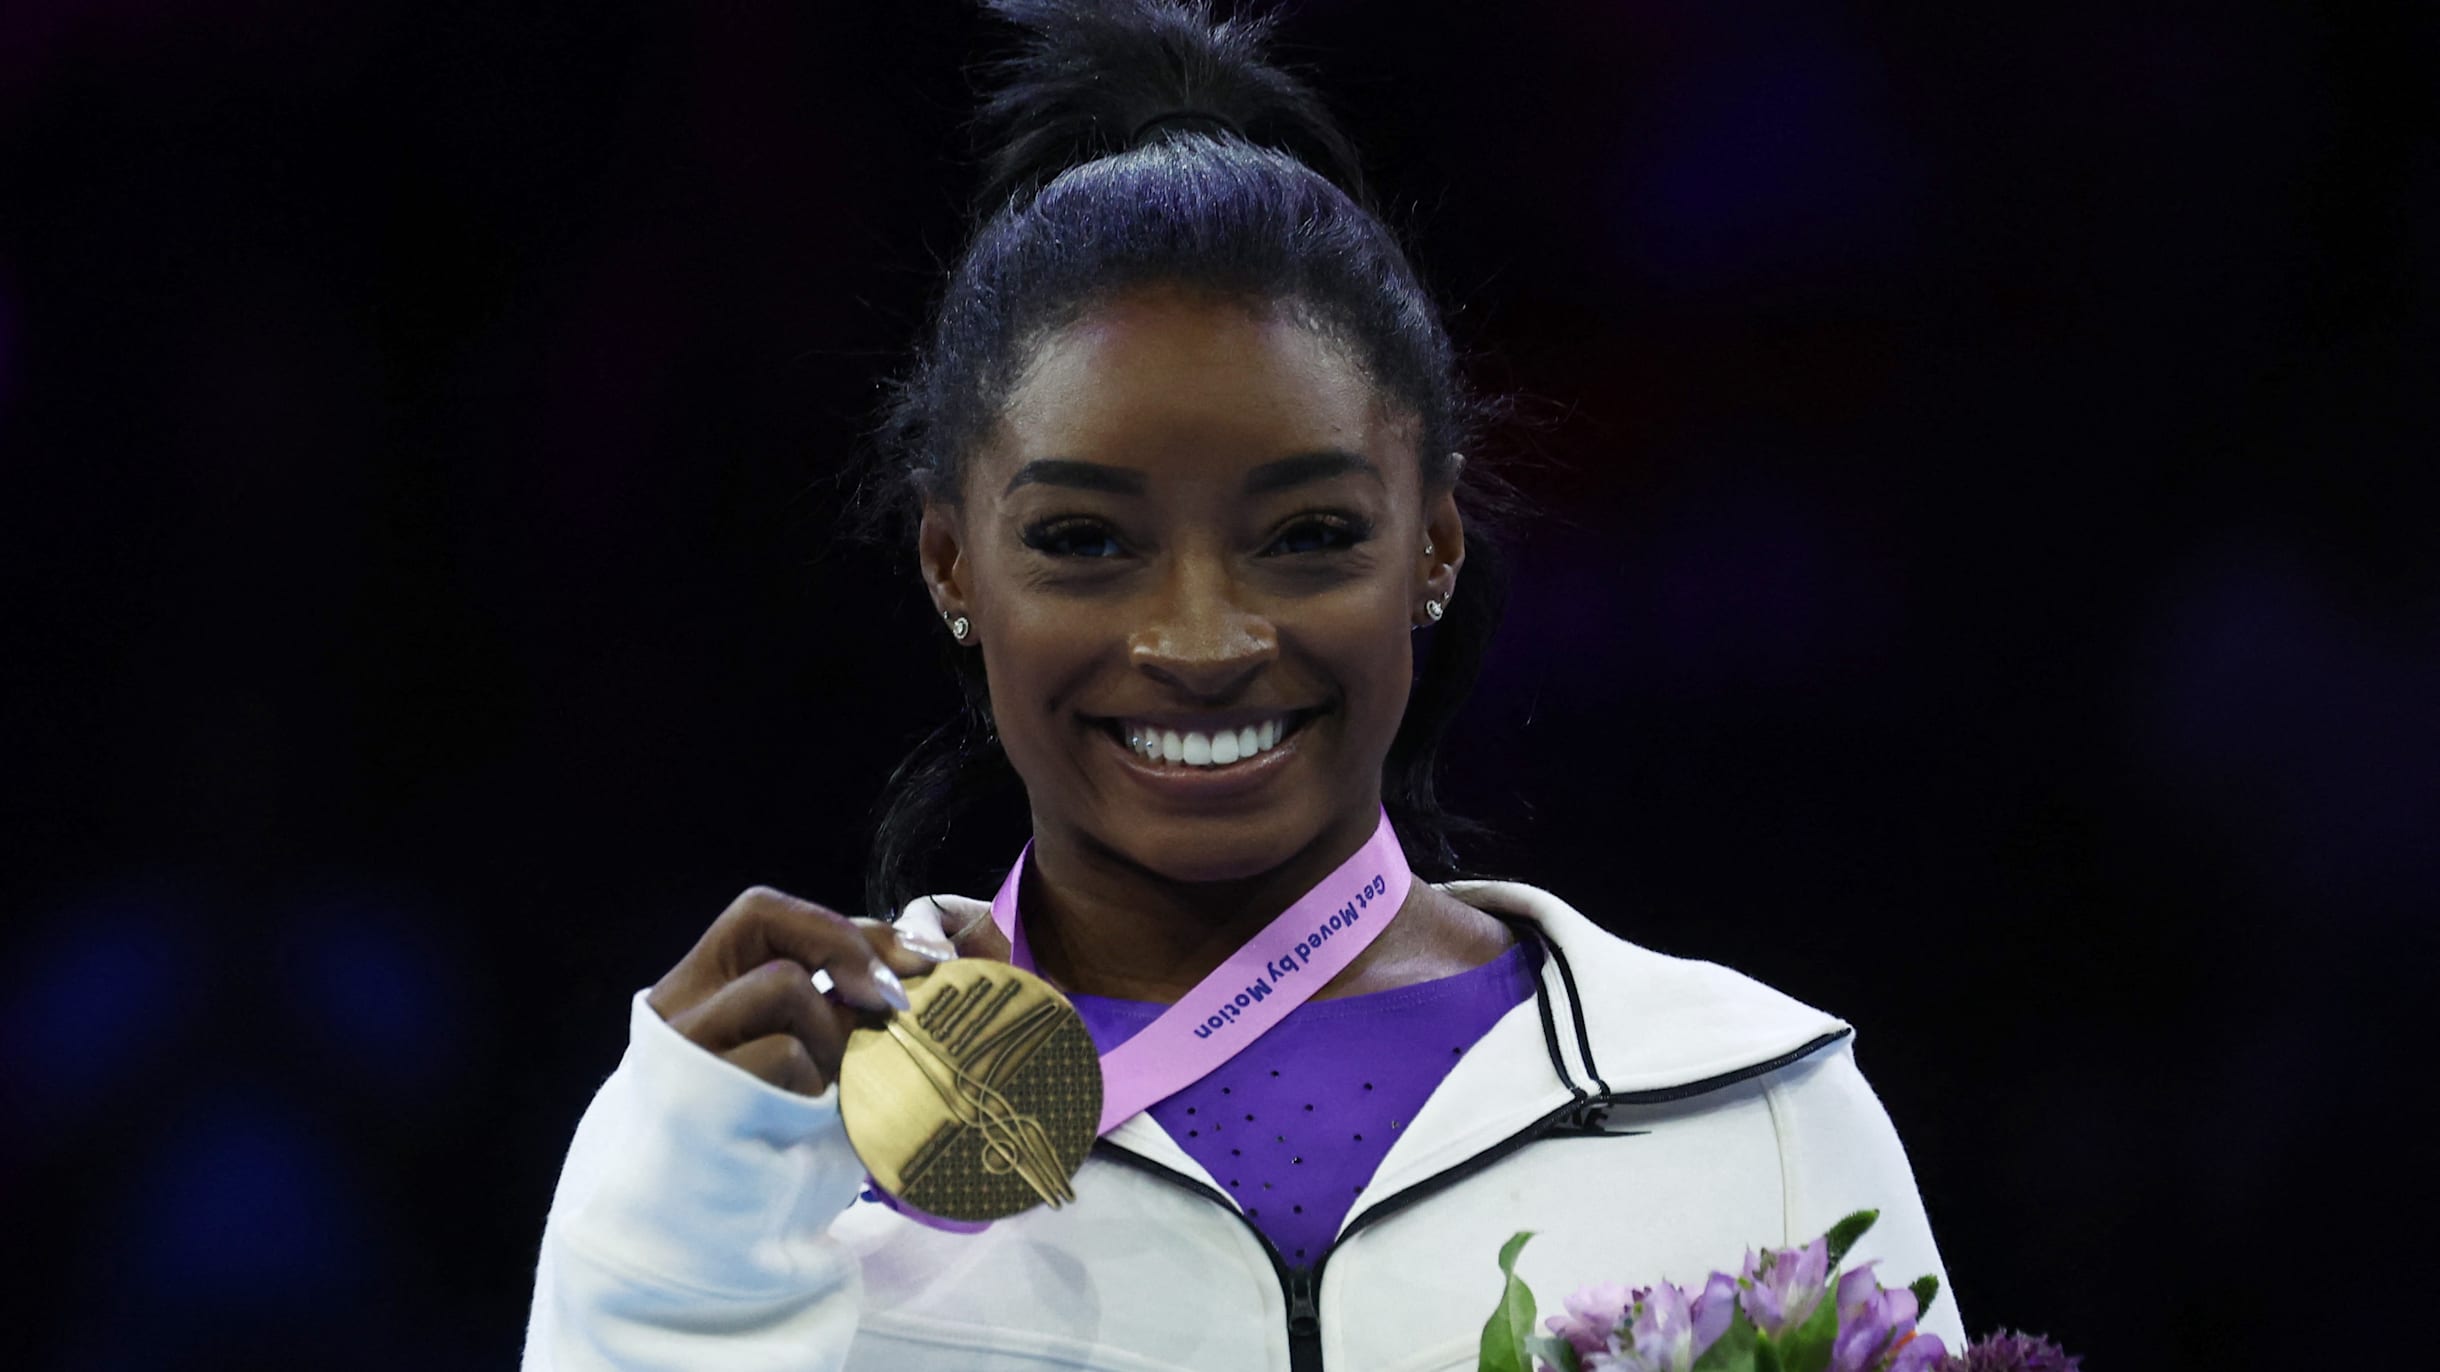 Make it 23 titles: Unstoppable Biles wraps up world championships comeback  with 2 more gold medals